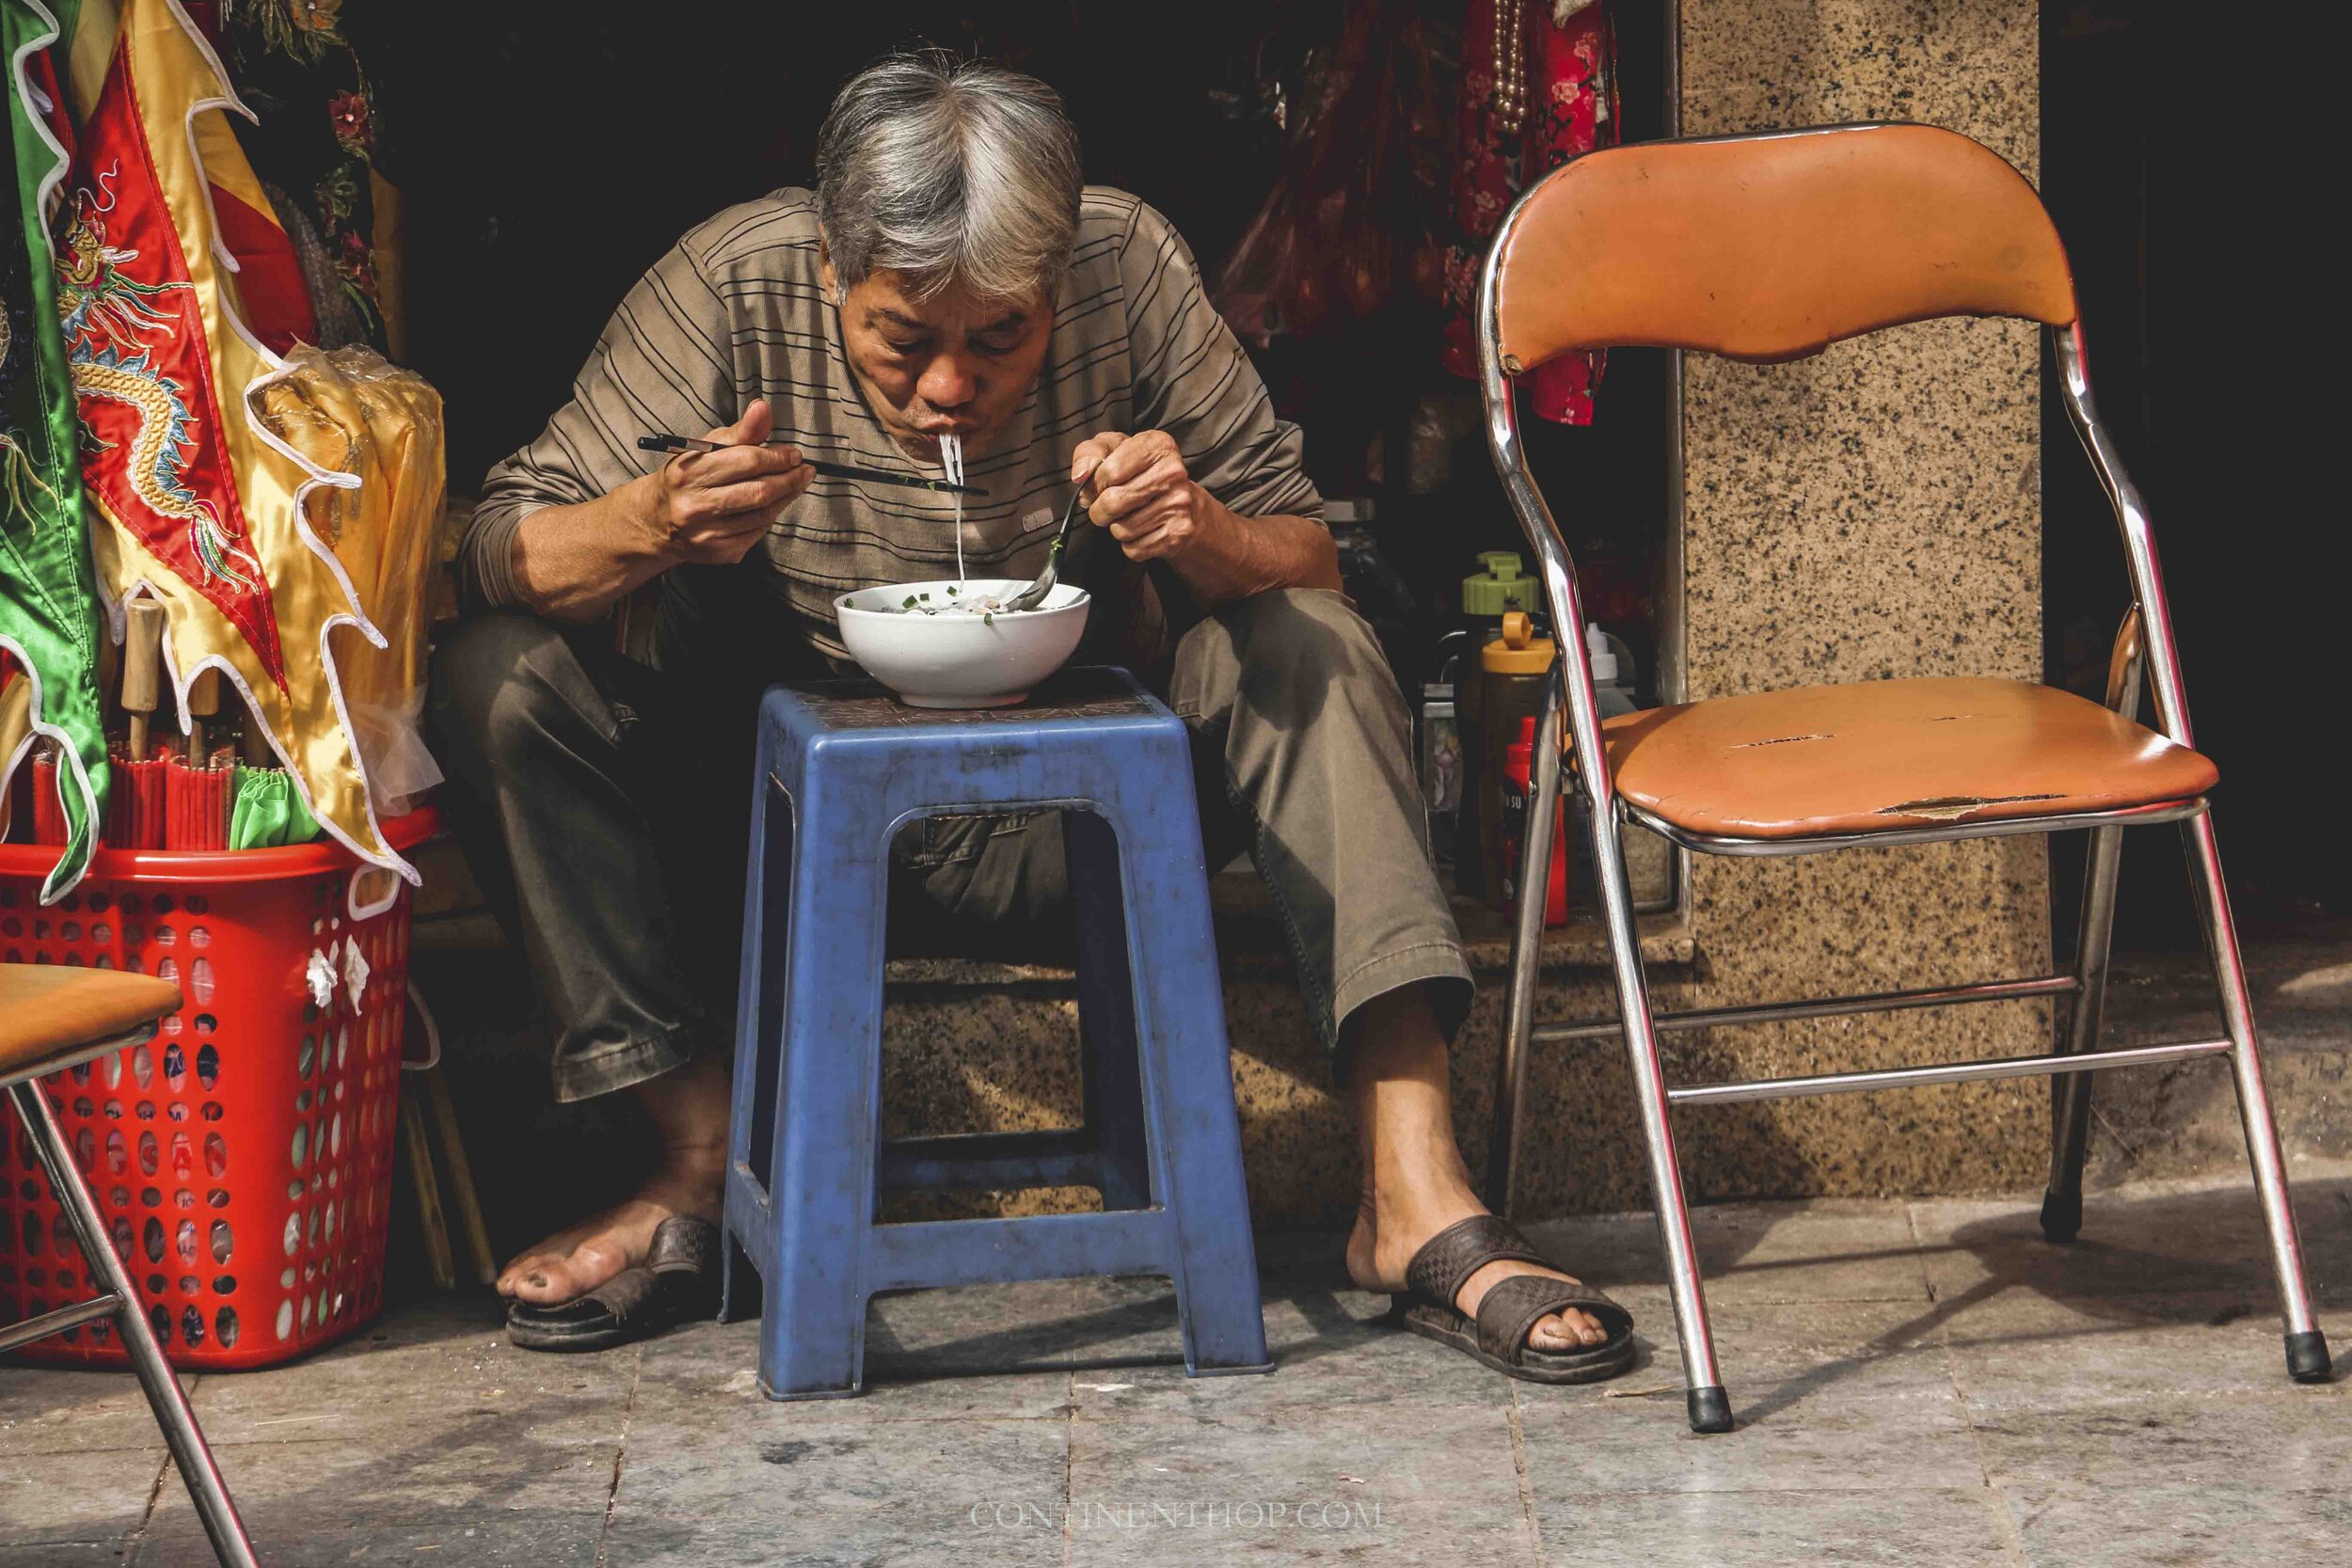 man eating a bowl of Pho outside his shop in Hanoi